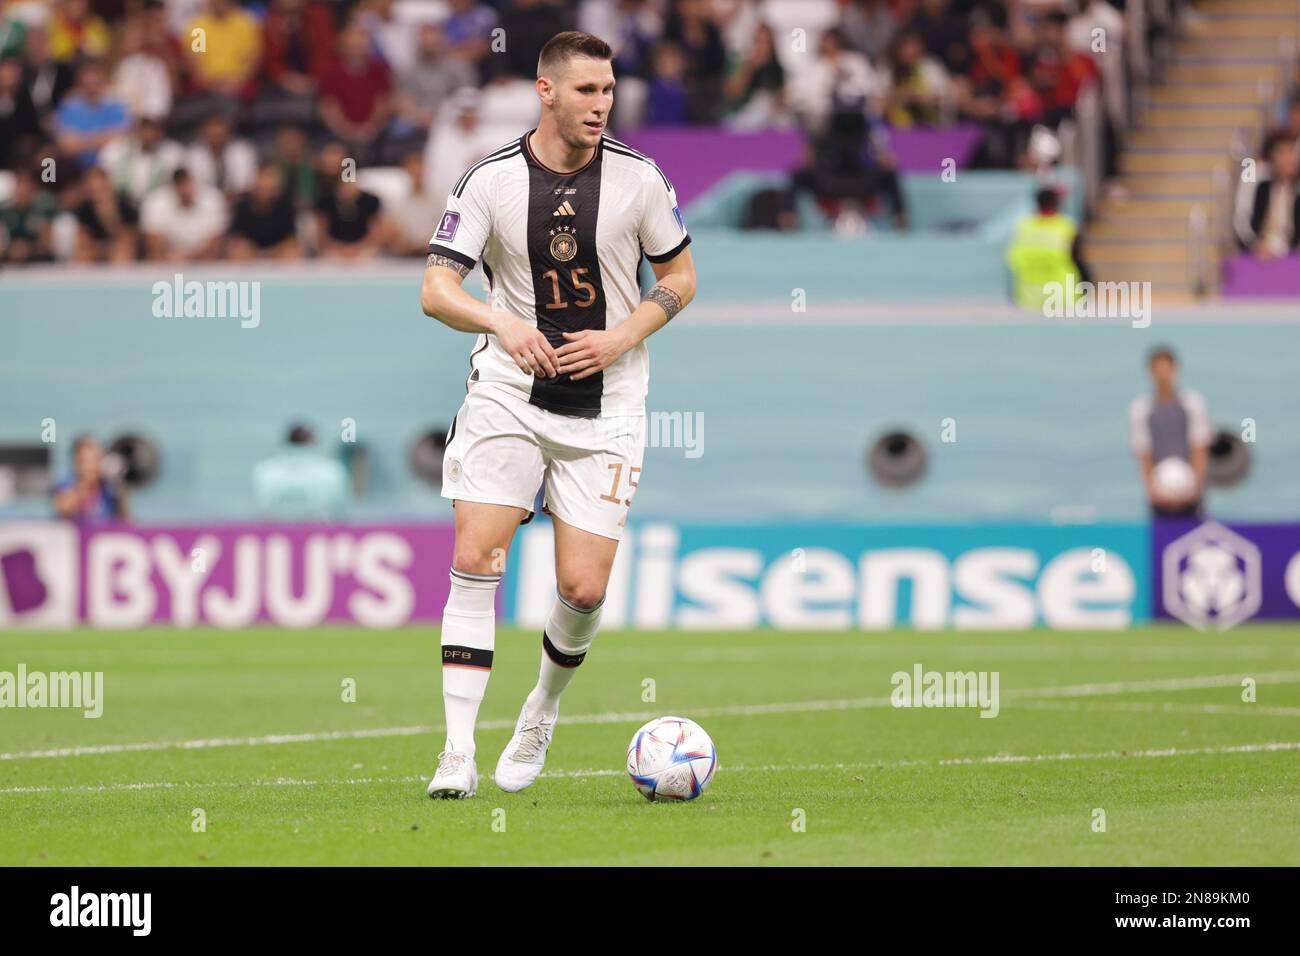 Niklas Sule of Germany in action during the FIFA World Cup Qatar 2022 match between Spain and Germany at Al Bayt Stadium. Final score: Spain 1:1 Germany. Stock Photo